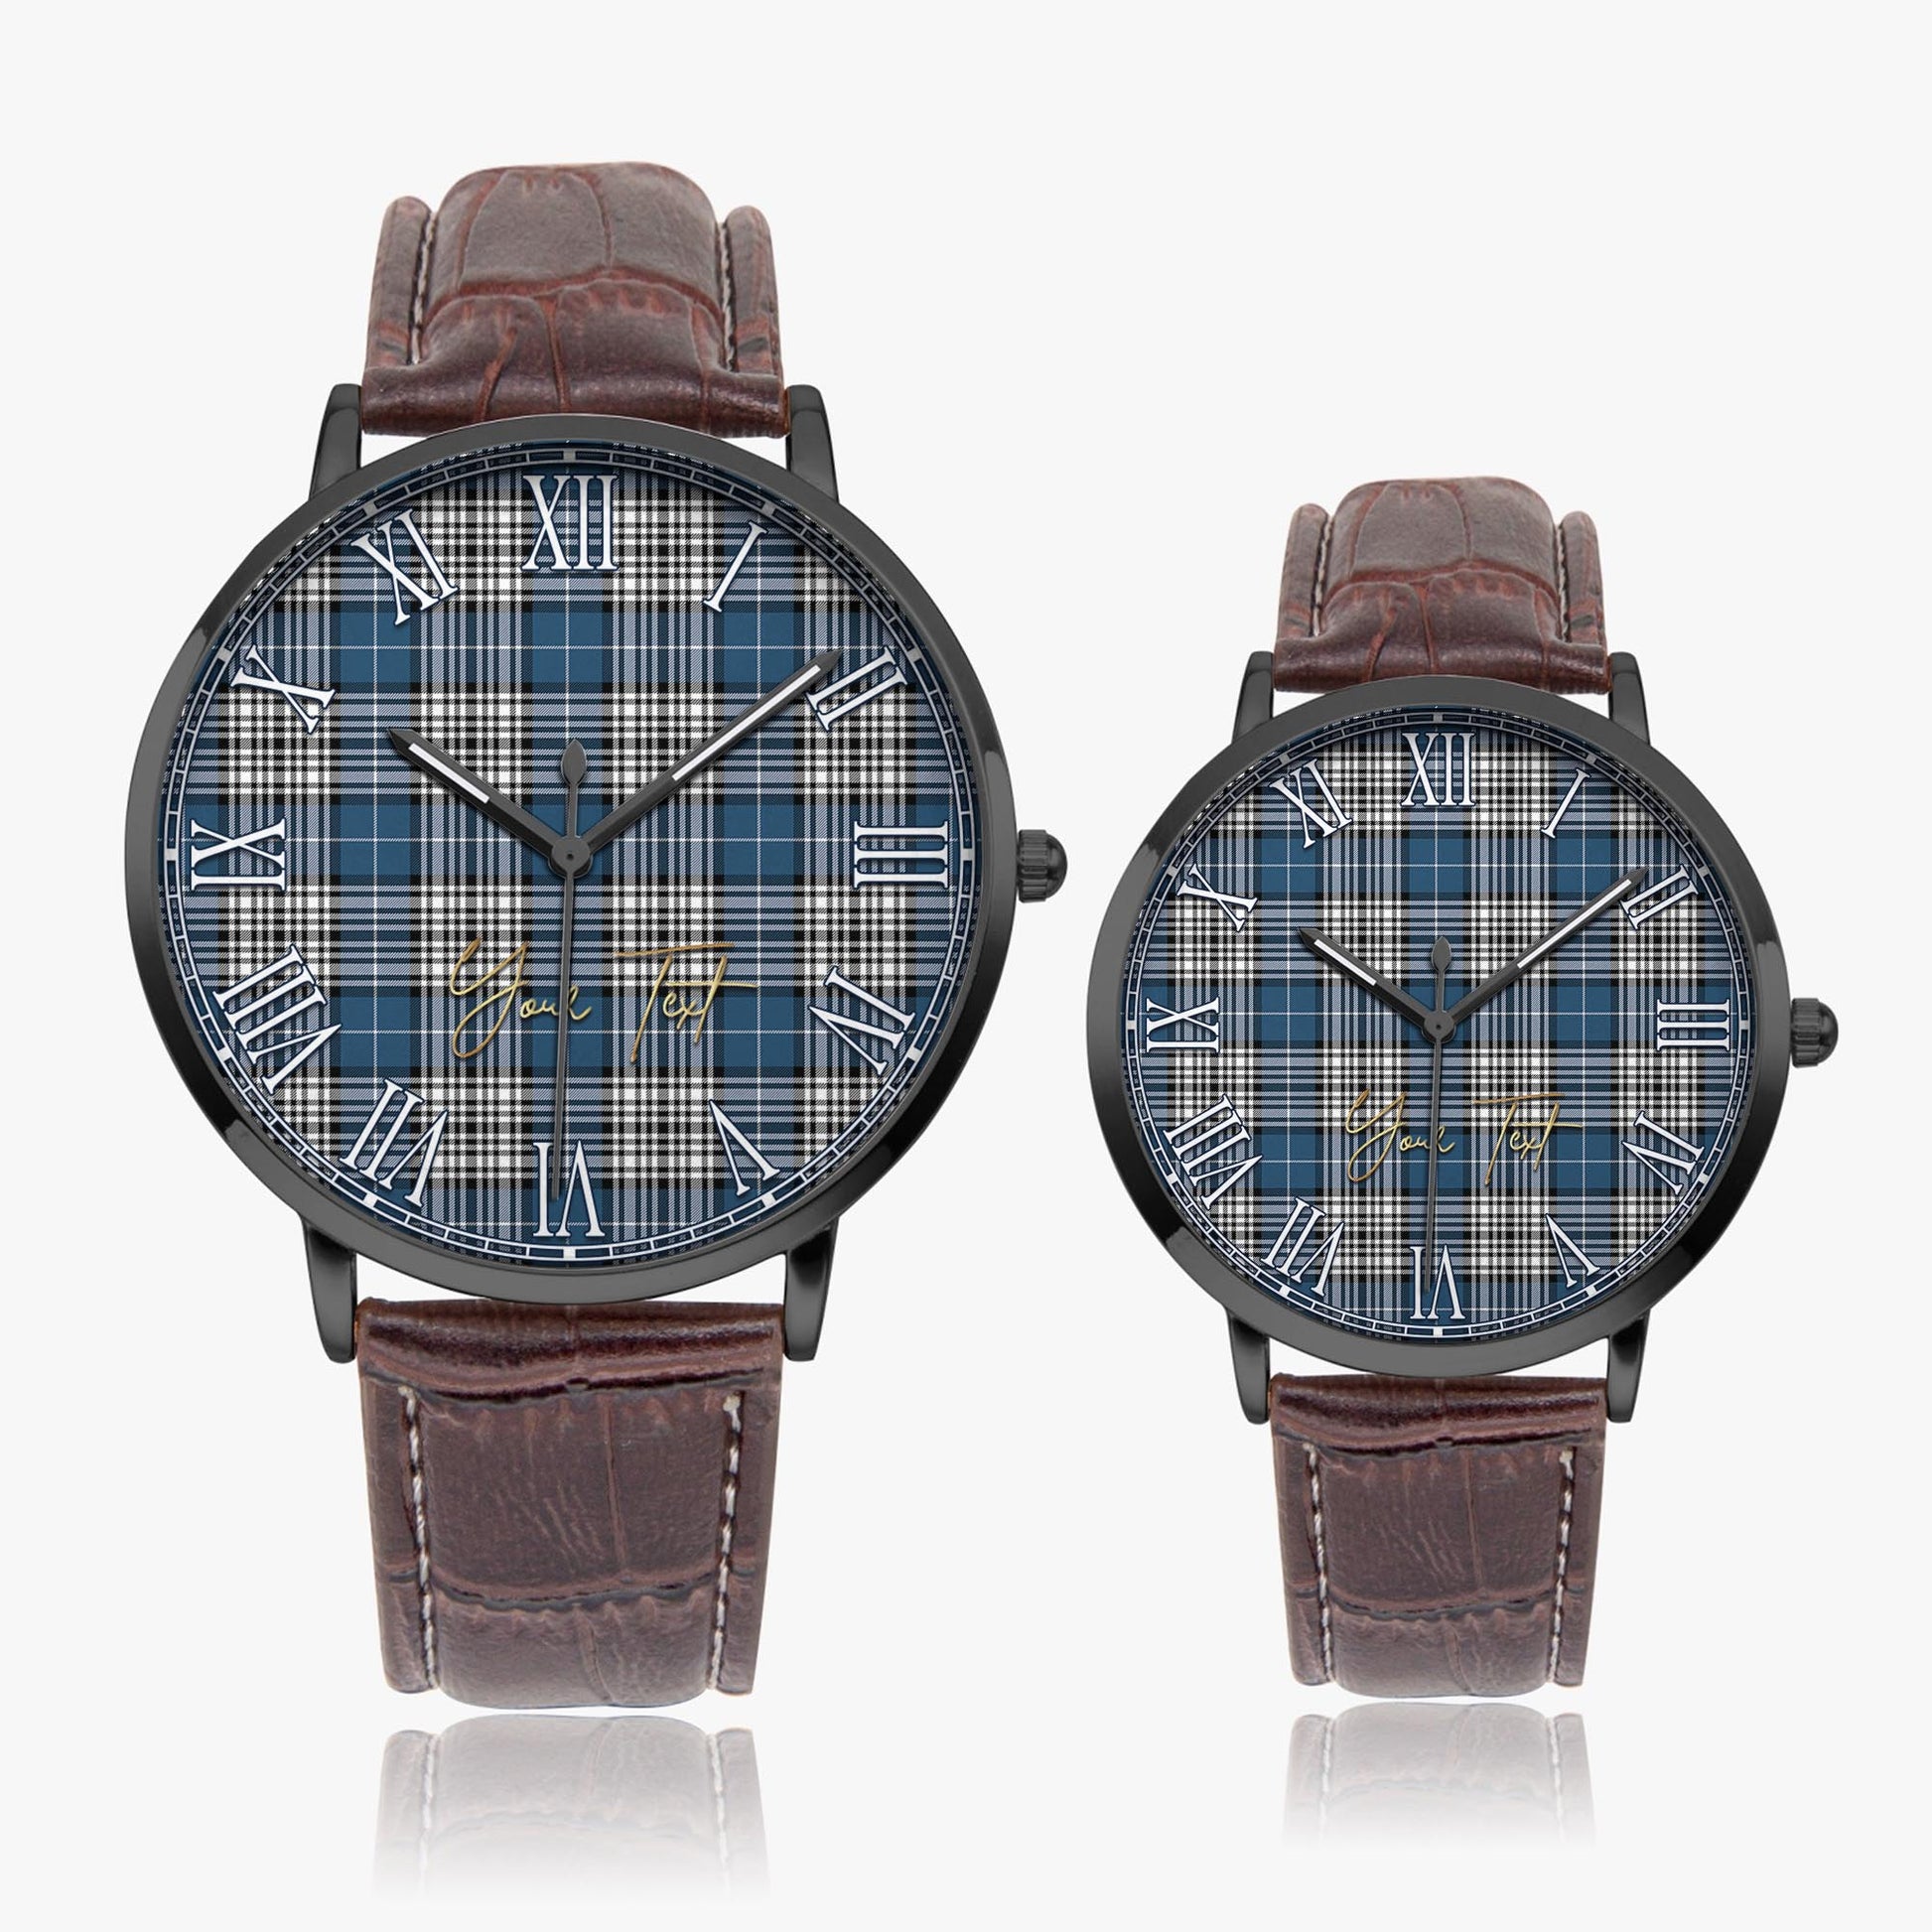 Napier Modern Tartan Personalized Your Text Leather Trap Quartz Watch Ultra Thin Black Case With Brown Leather Strap - Tartanvibesclothing